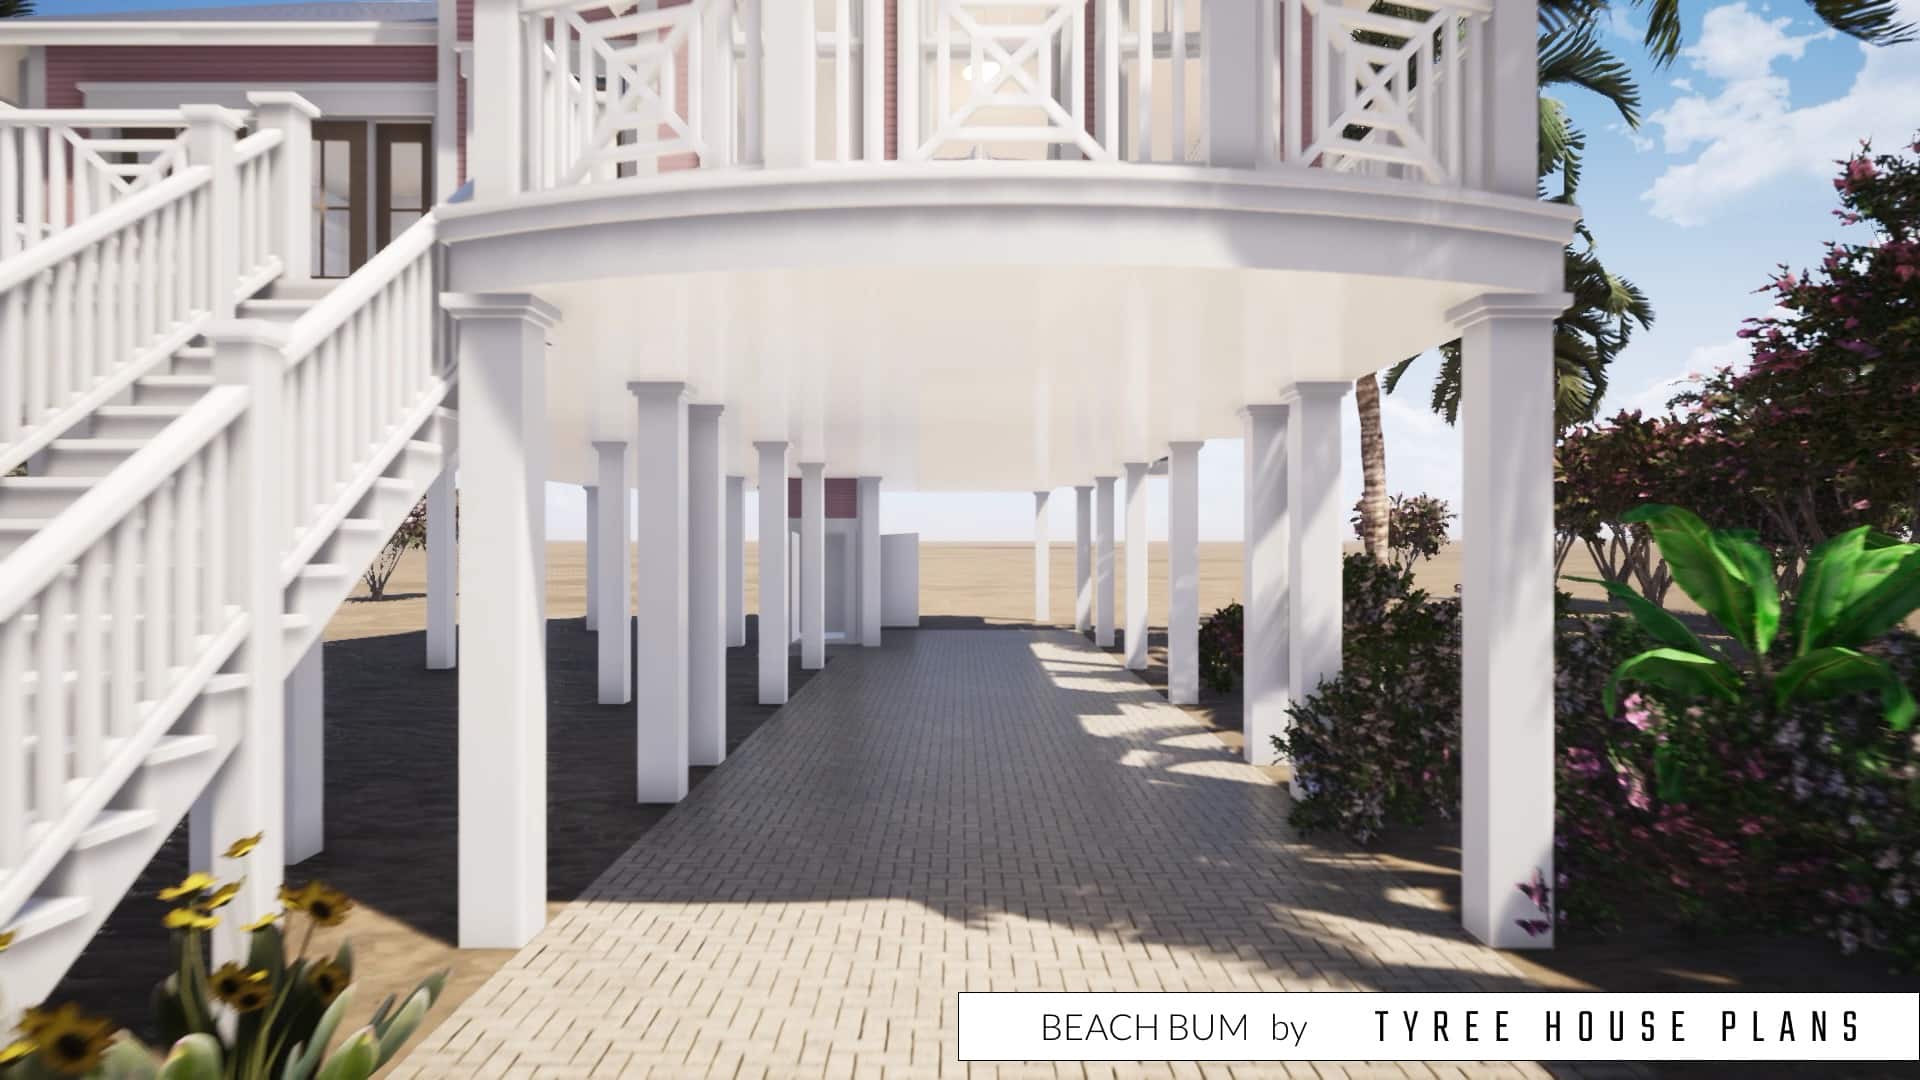 Parking below the house. Beach Bum by Tyree House Plans.